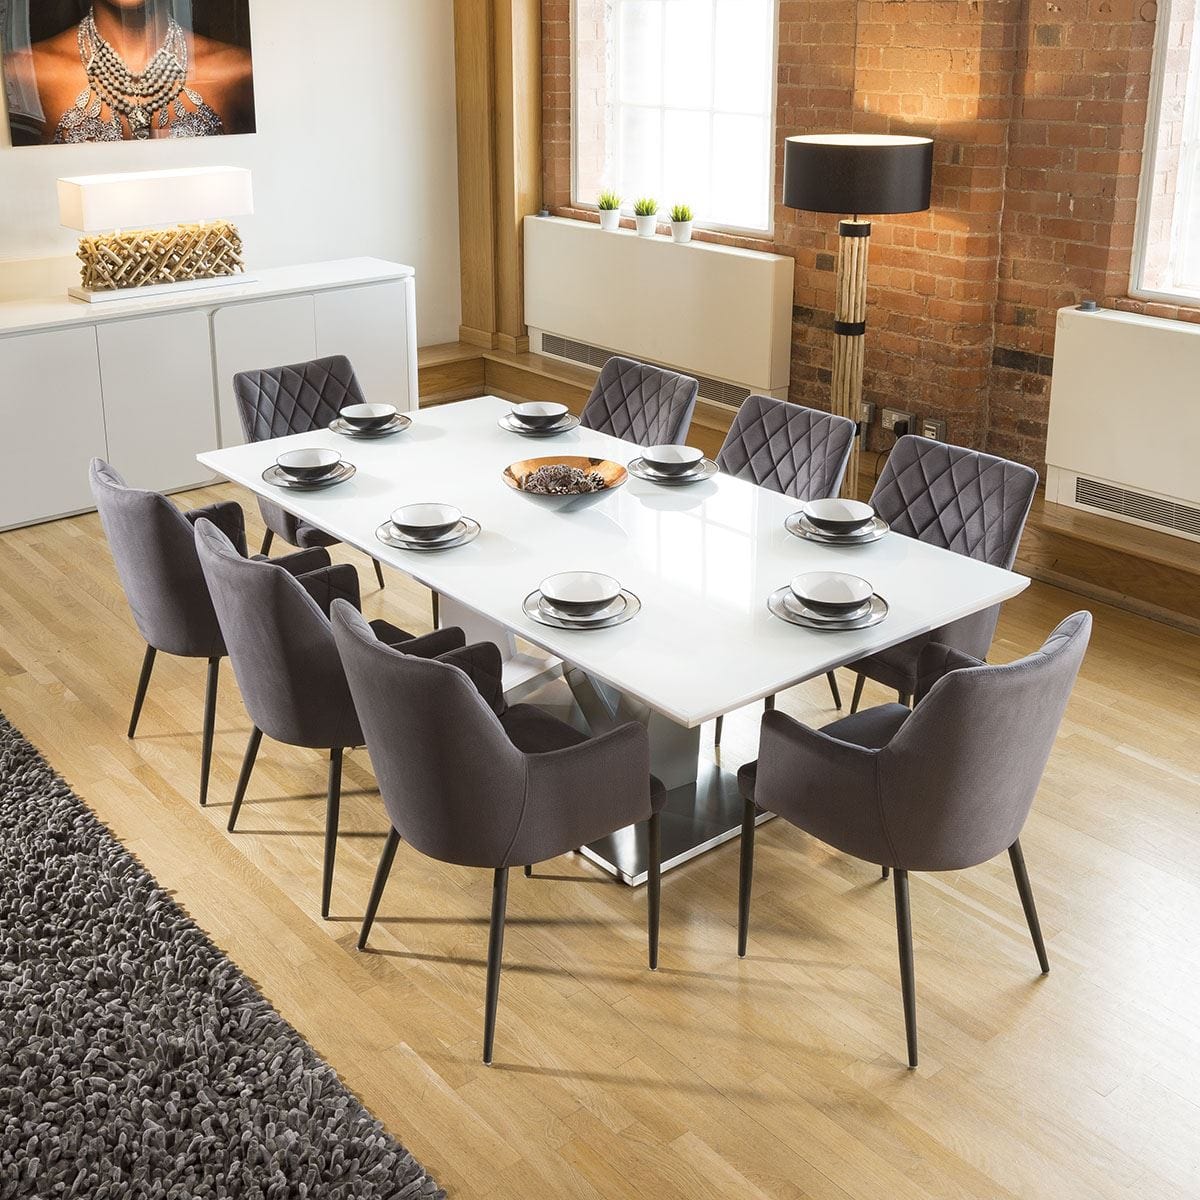 Quatropi Huge 8 Seater Dining Set 2.2mt White Glass Top Table 8 Carver Grey Chairs